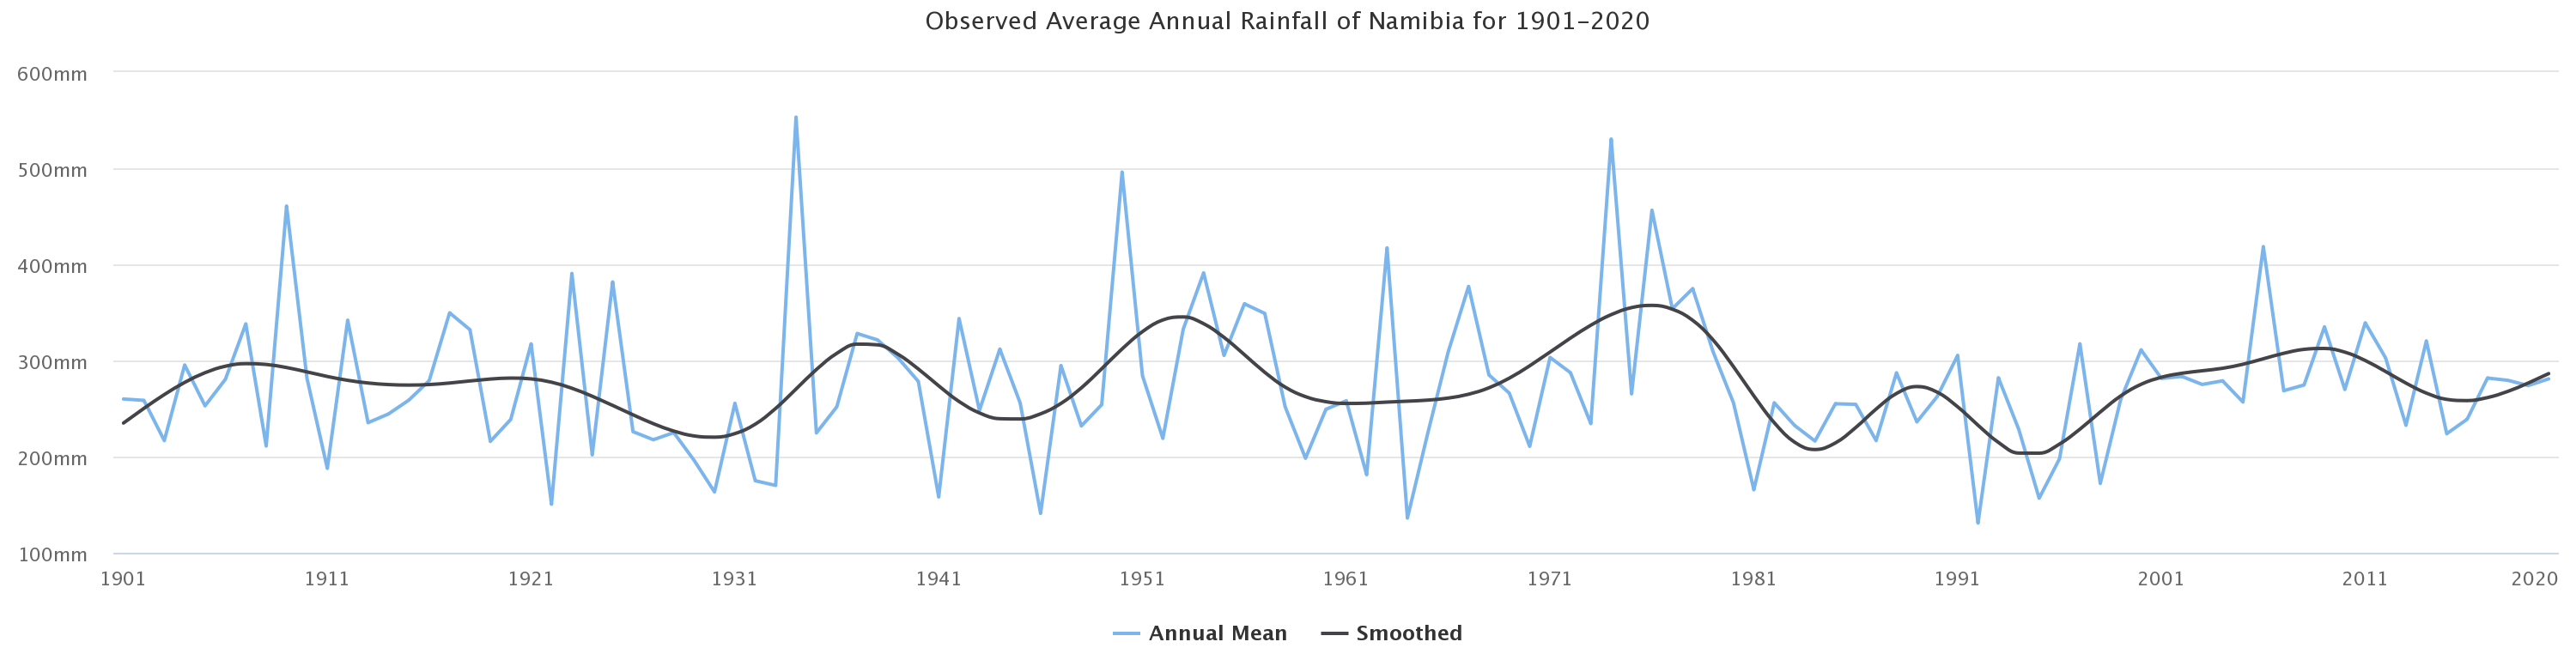 A chart showing how rainfall has varied over time in Namibia. The smoothed average remains between 200-400mm throughout this period.